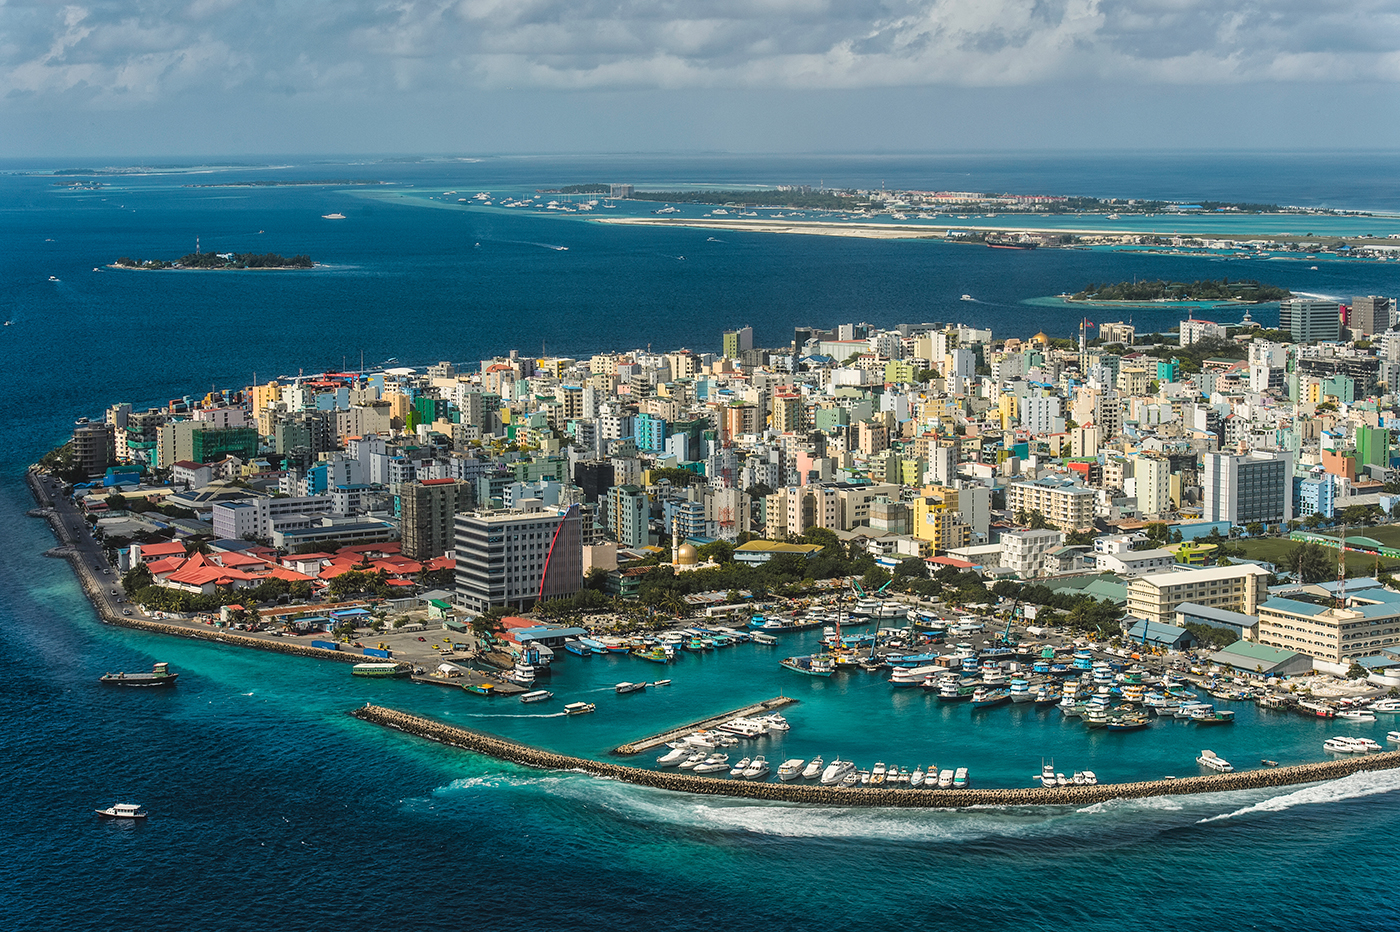 The capital of the Maldives from above